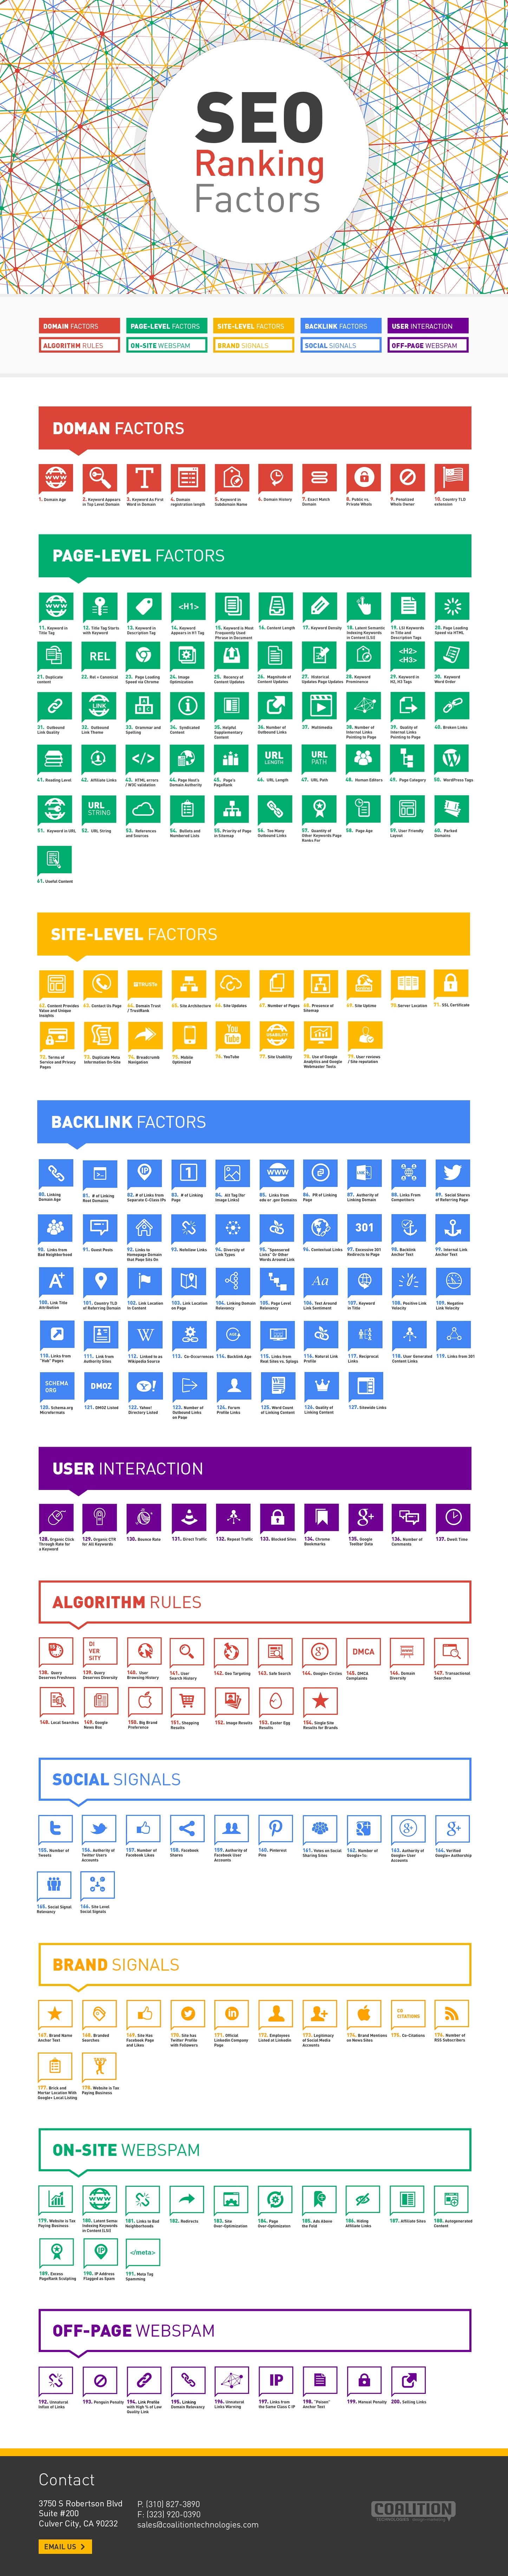 Top 200 Most Important SEO Ranking Factors [Infographic]